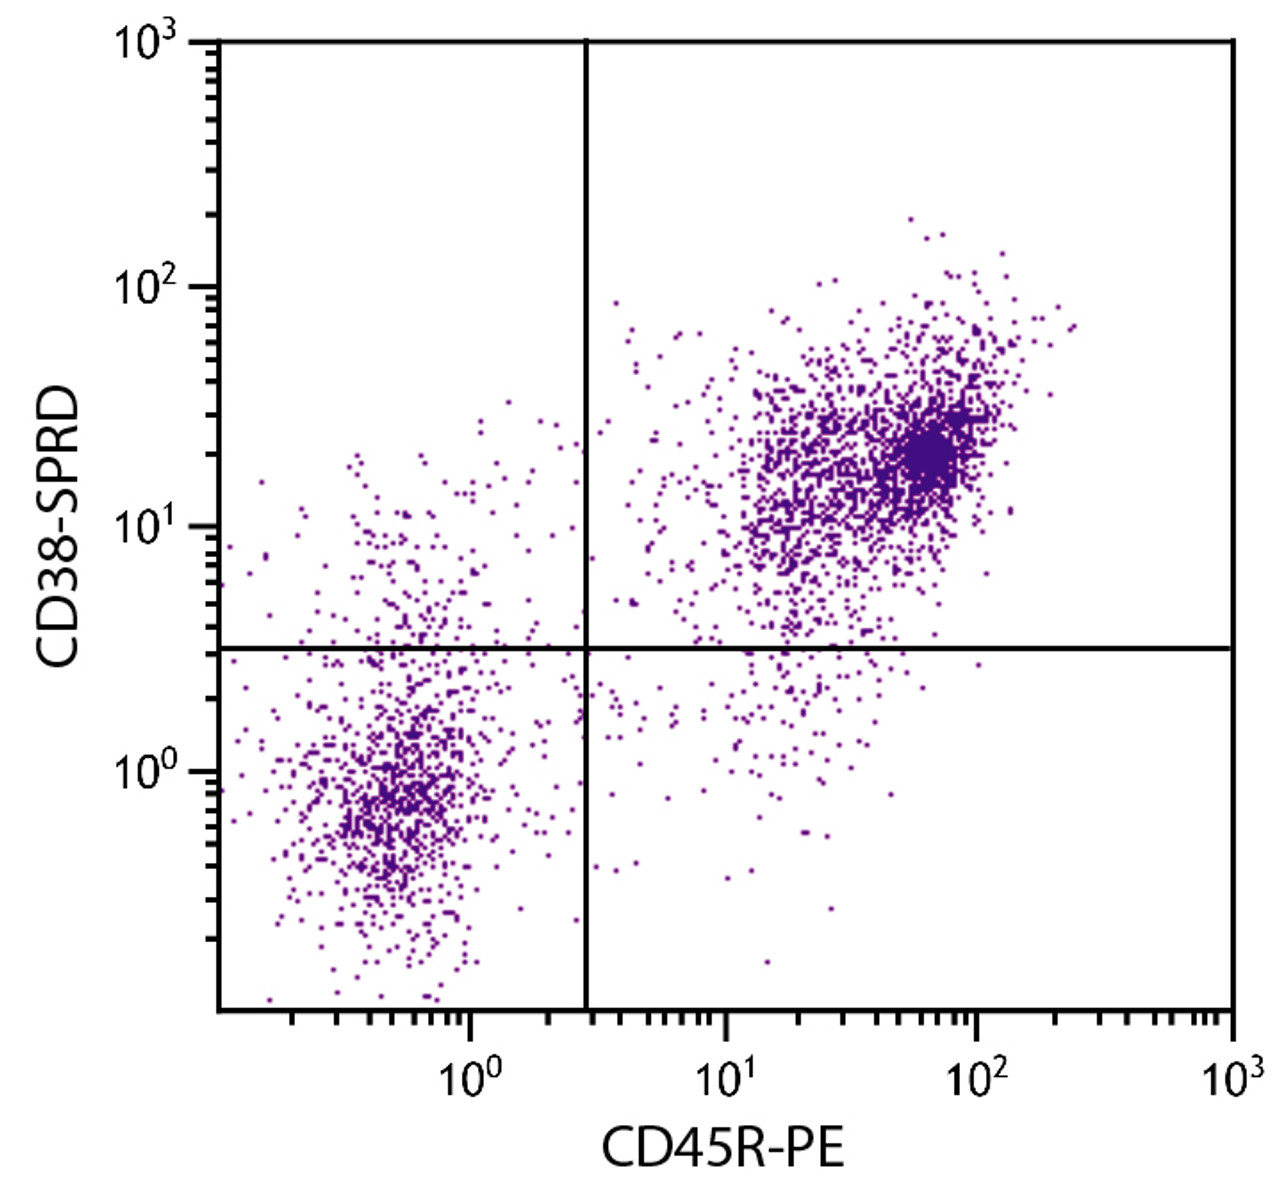 BALB/c mouse splenocytes were stained with Rat Anti-Mouse CD38-SPRD (Cat. No. 98-753) and Rat Anti-Mouse CD45R-PE .